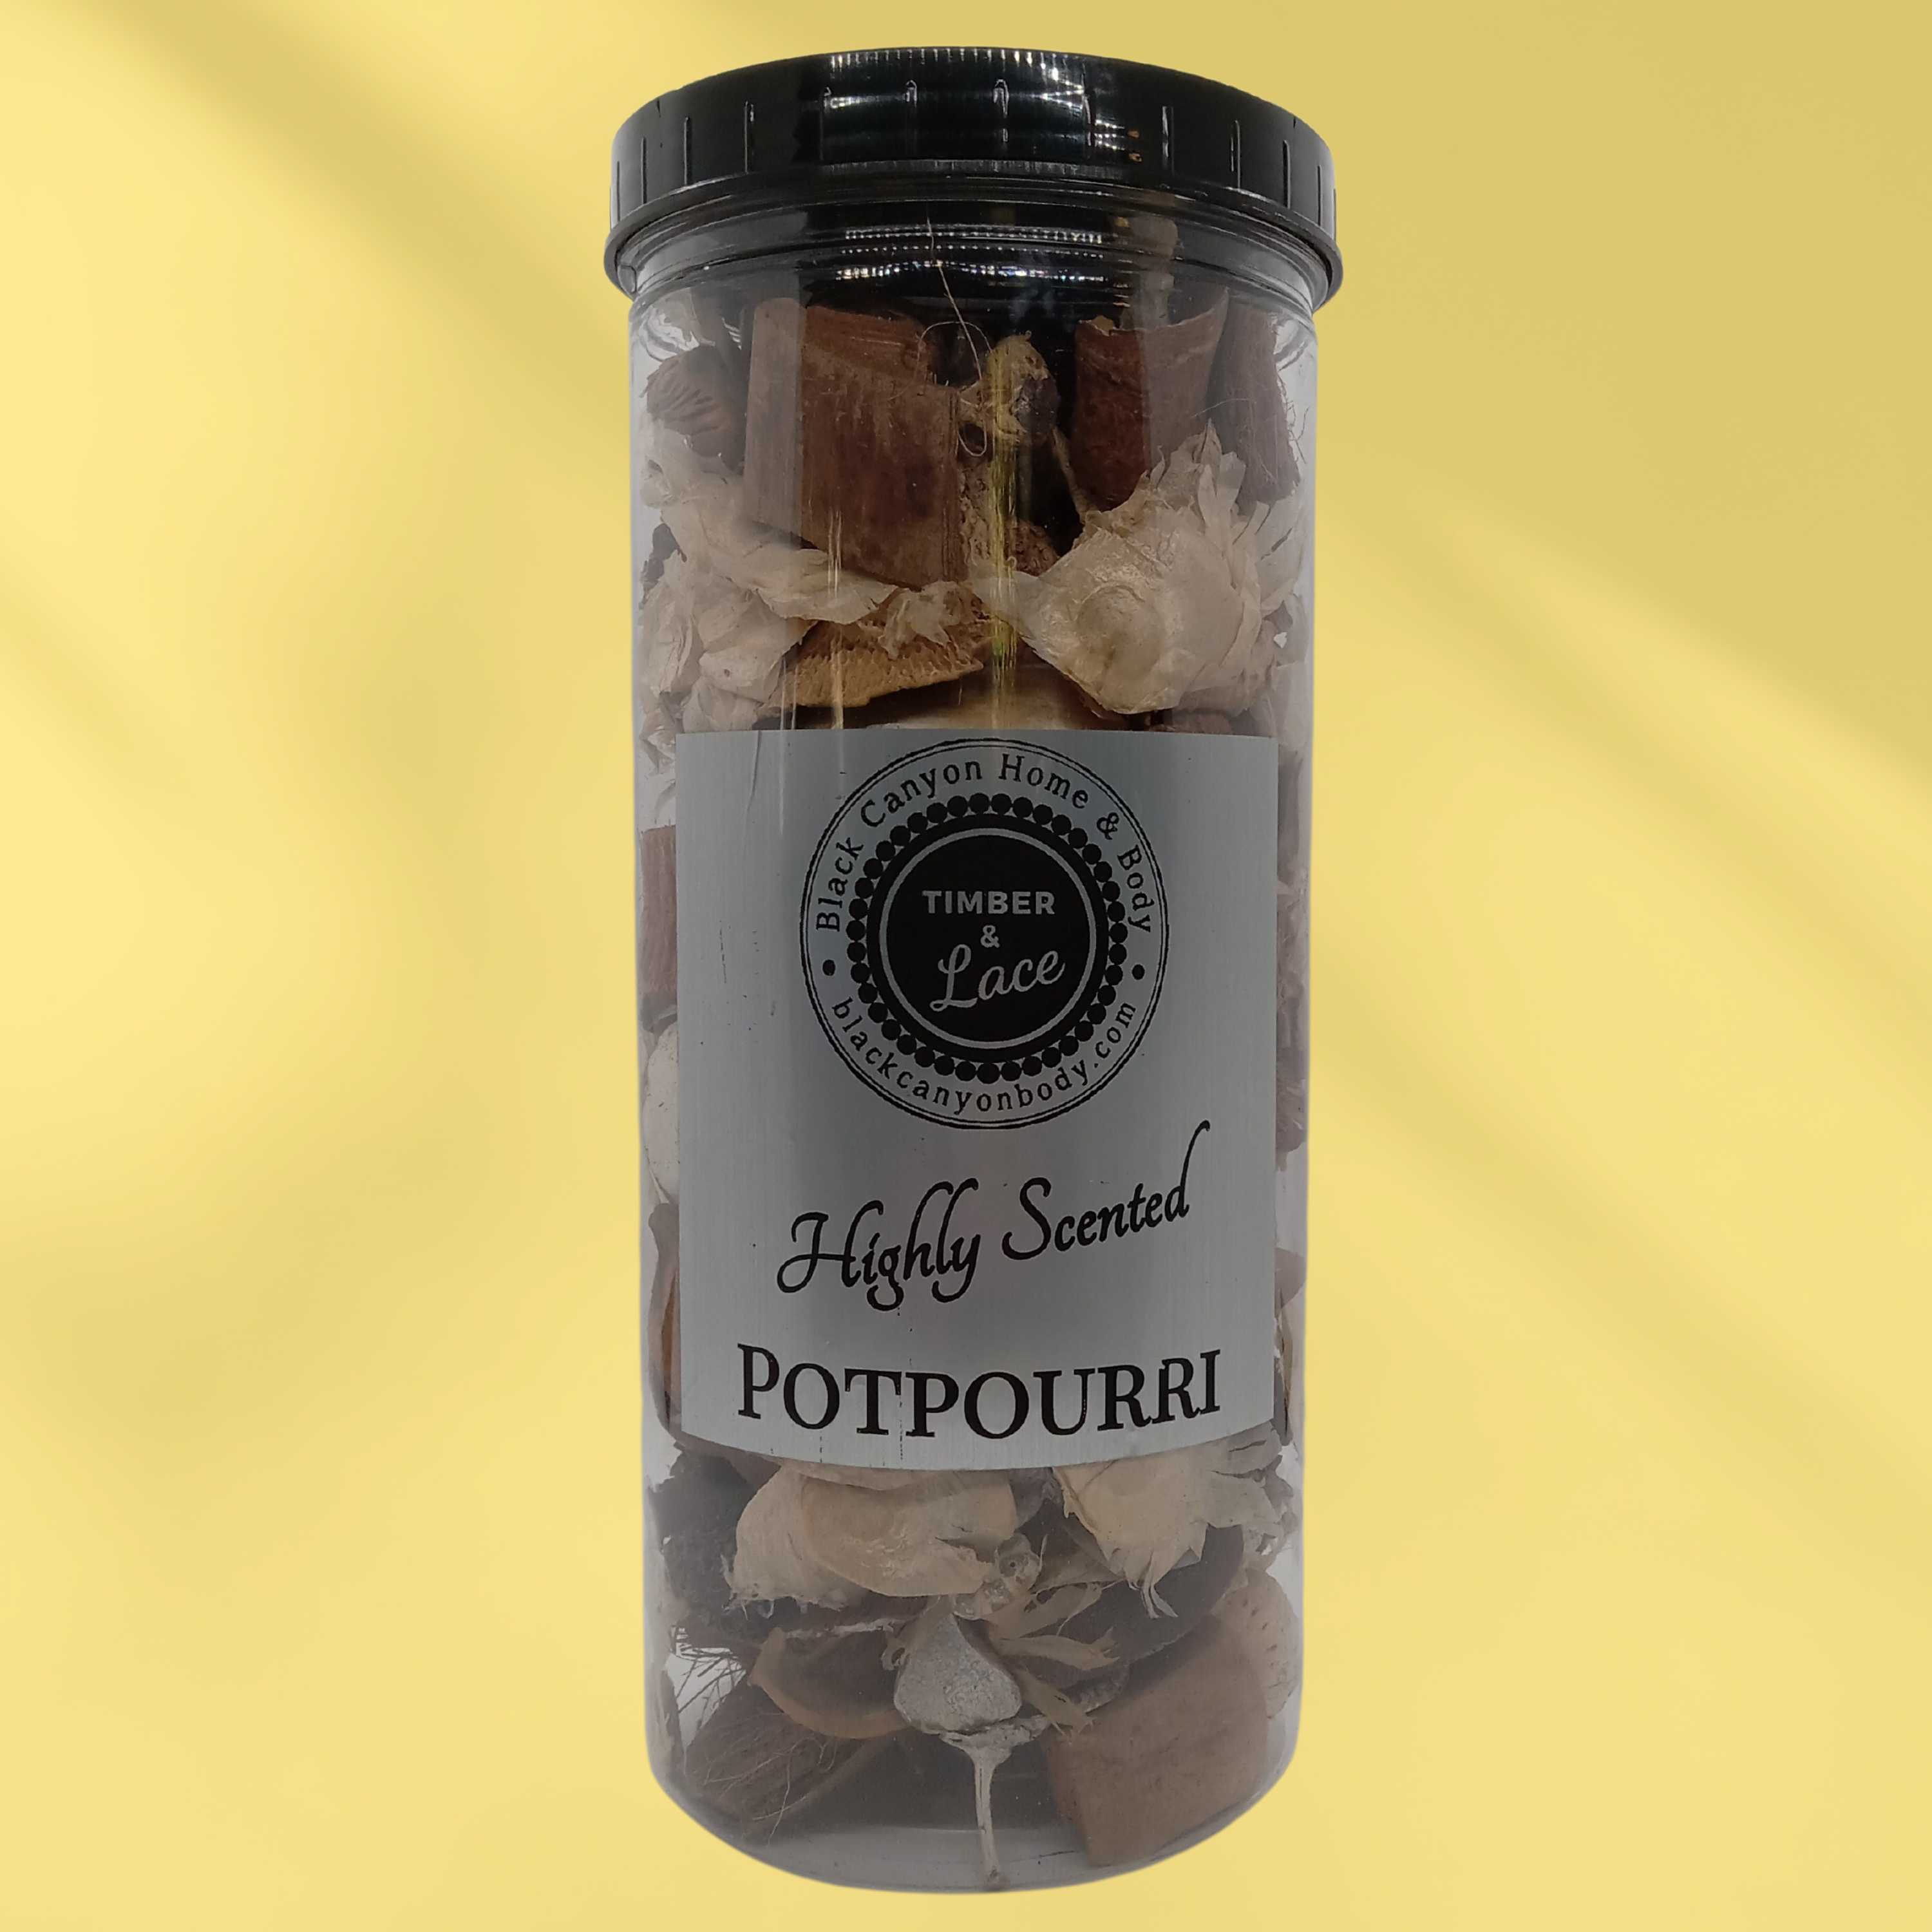 Timber & Lace Chocolate Mousse Scented Potpourri